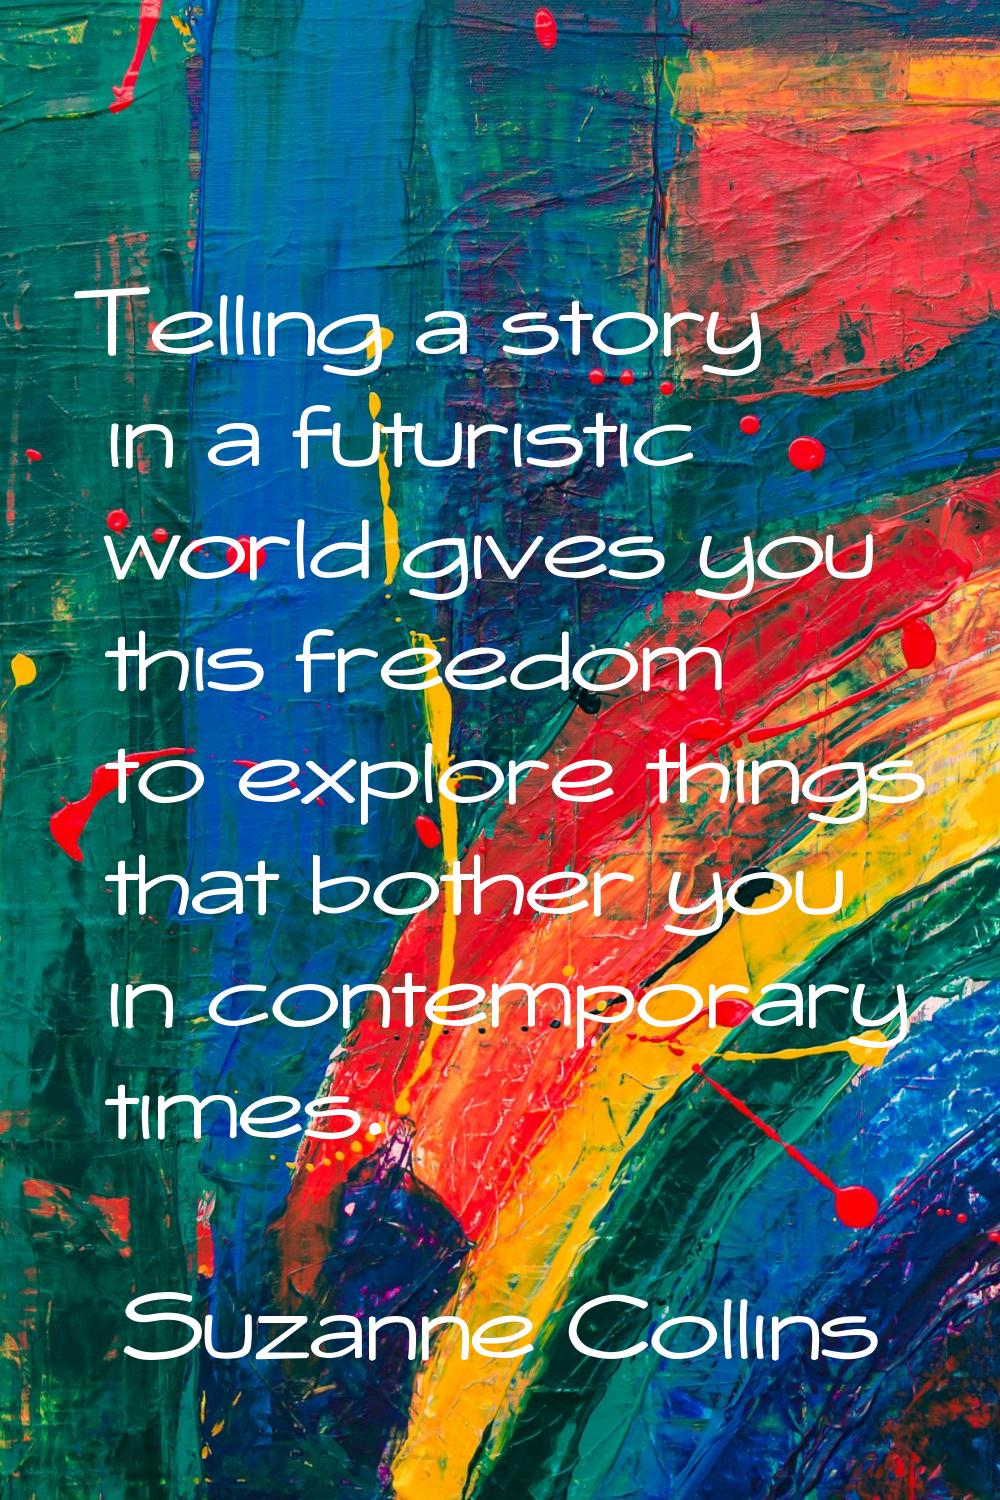 Telling a story in a futuristic world gives you this freedom to explore things that bother you in c